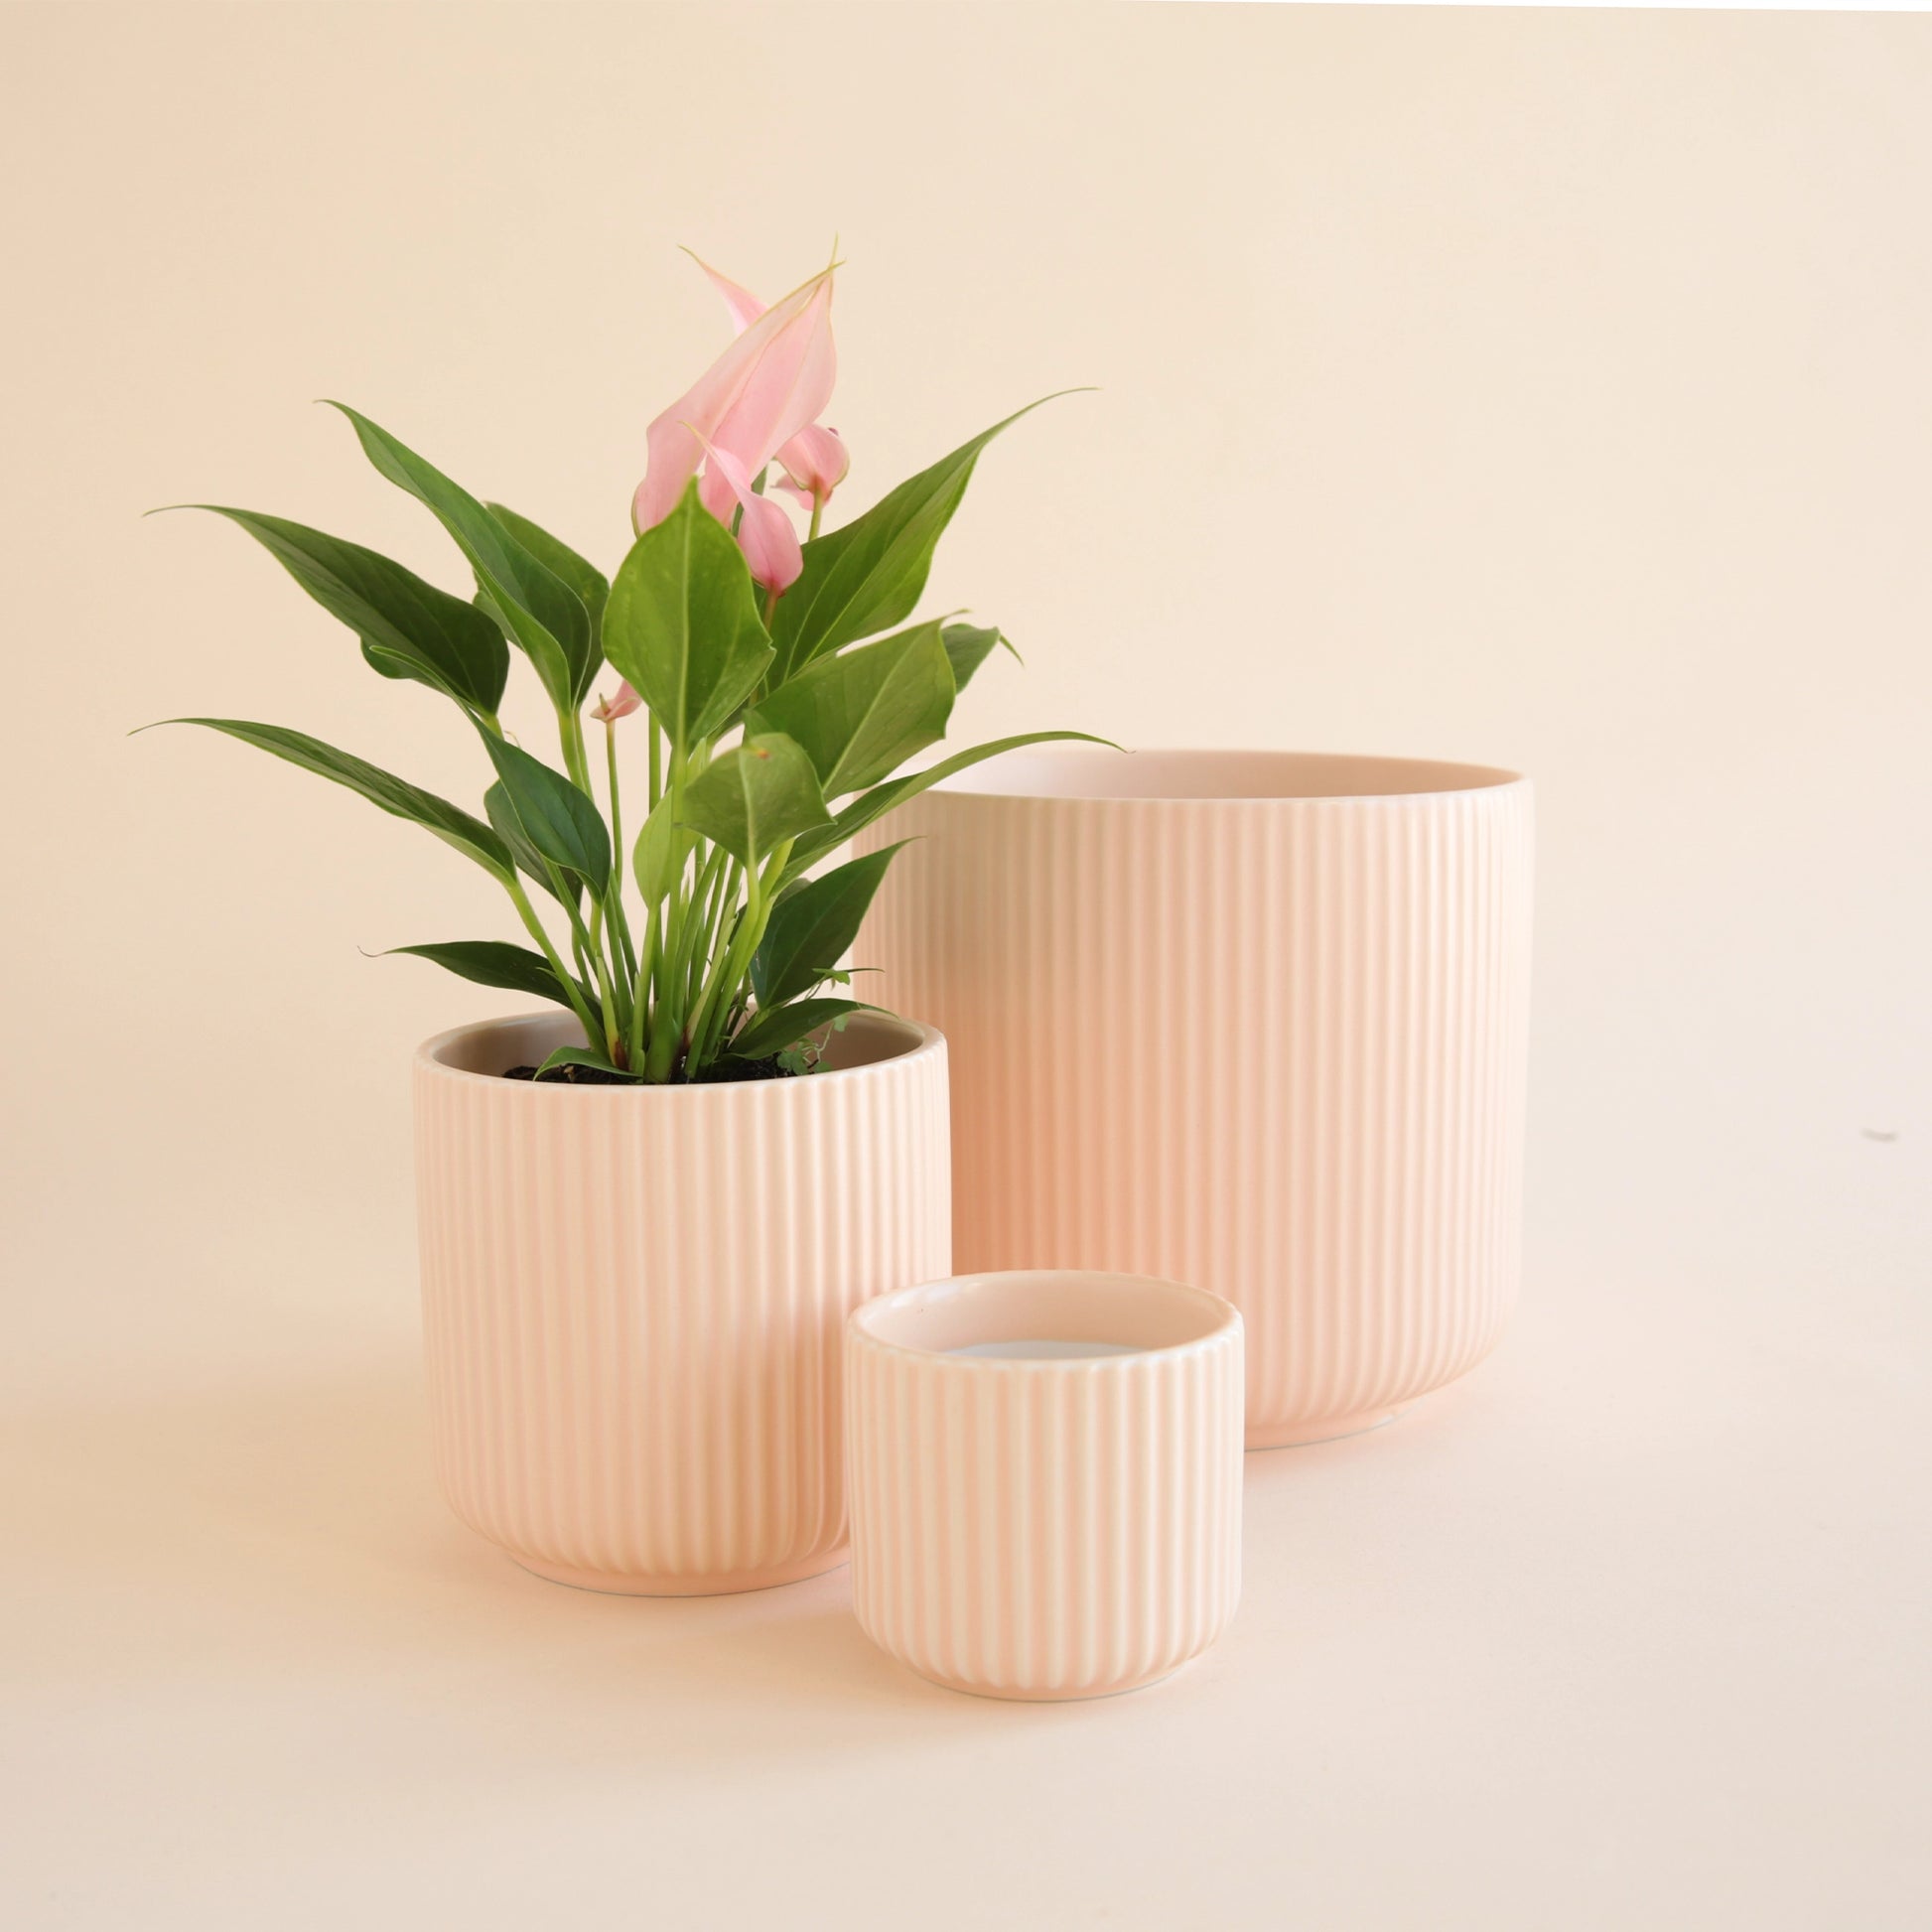  On an ivory background is three different sized pink ceramic planters with fluting and a rounded base.